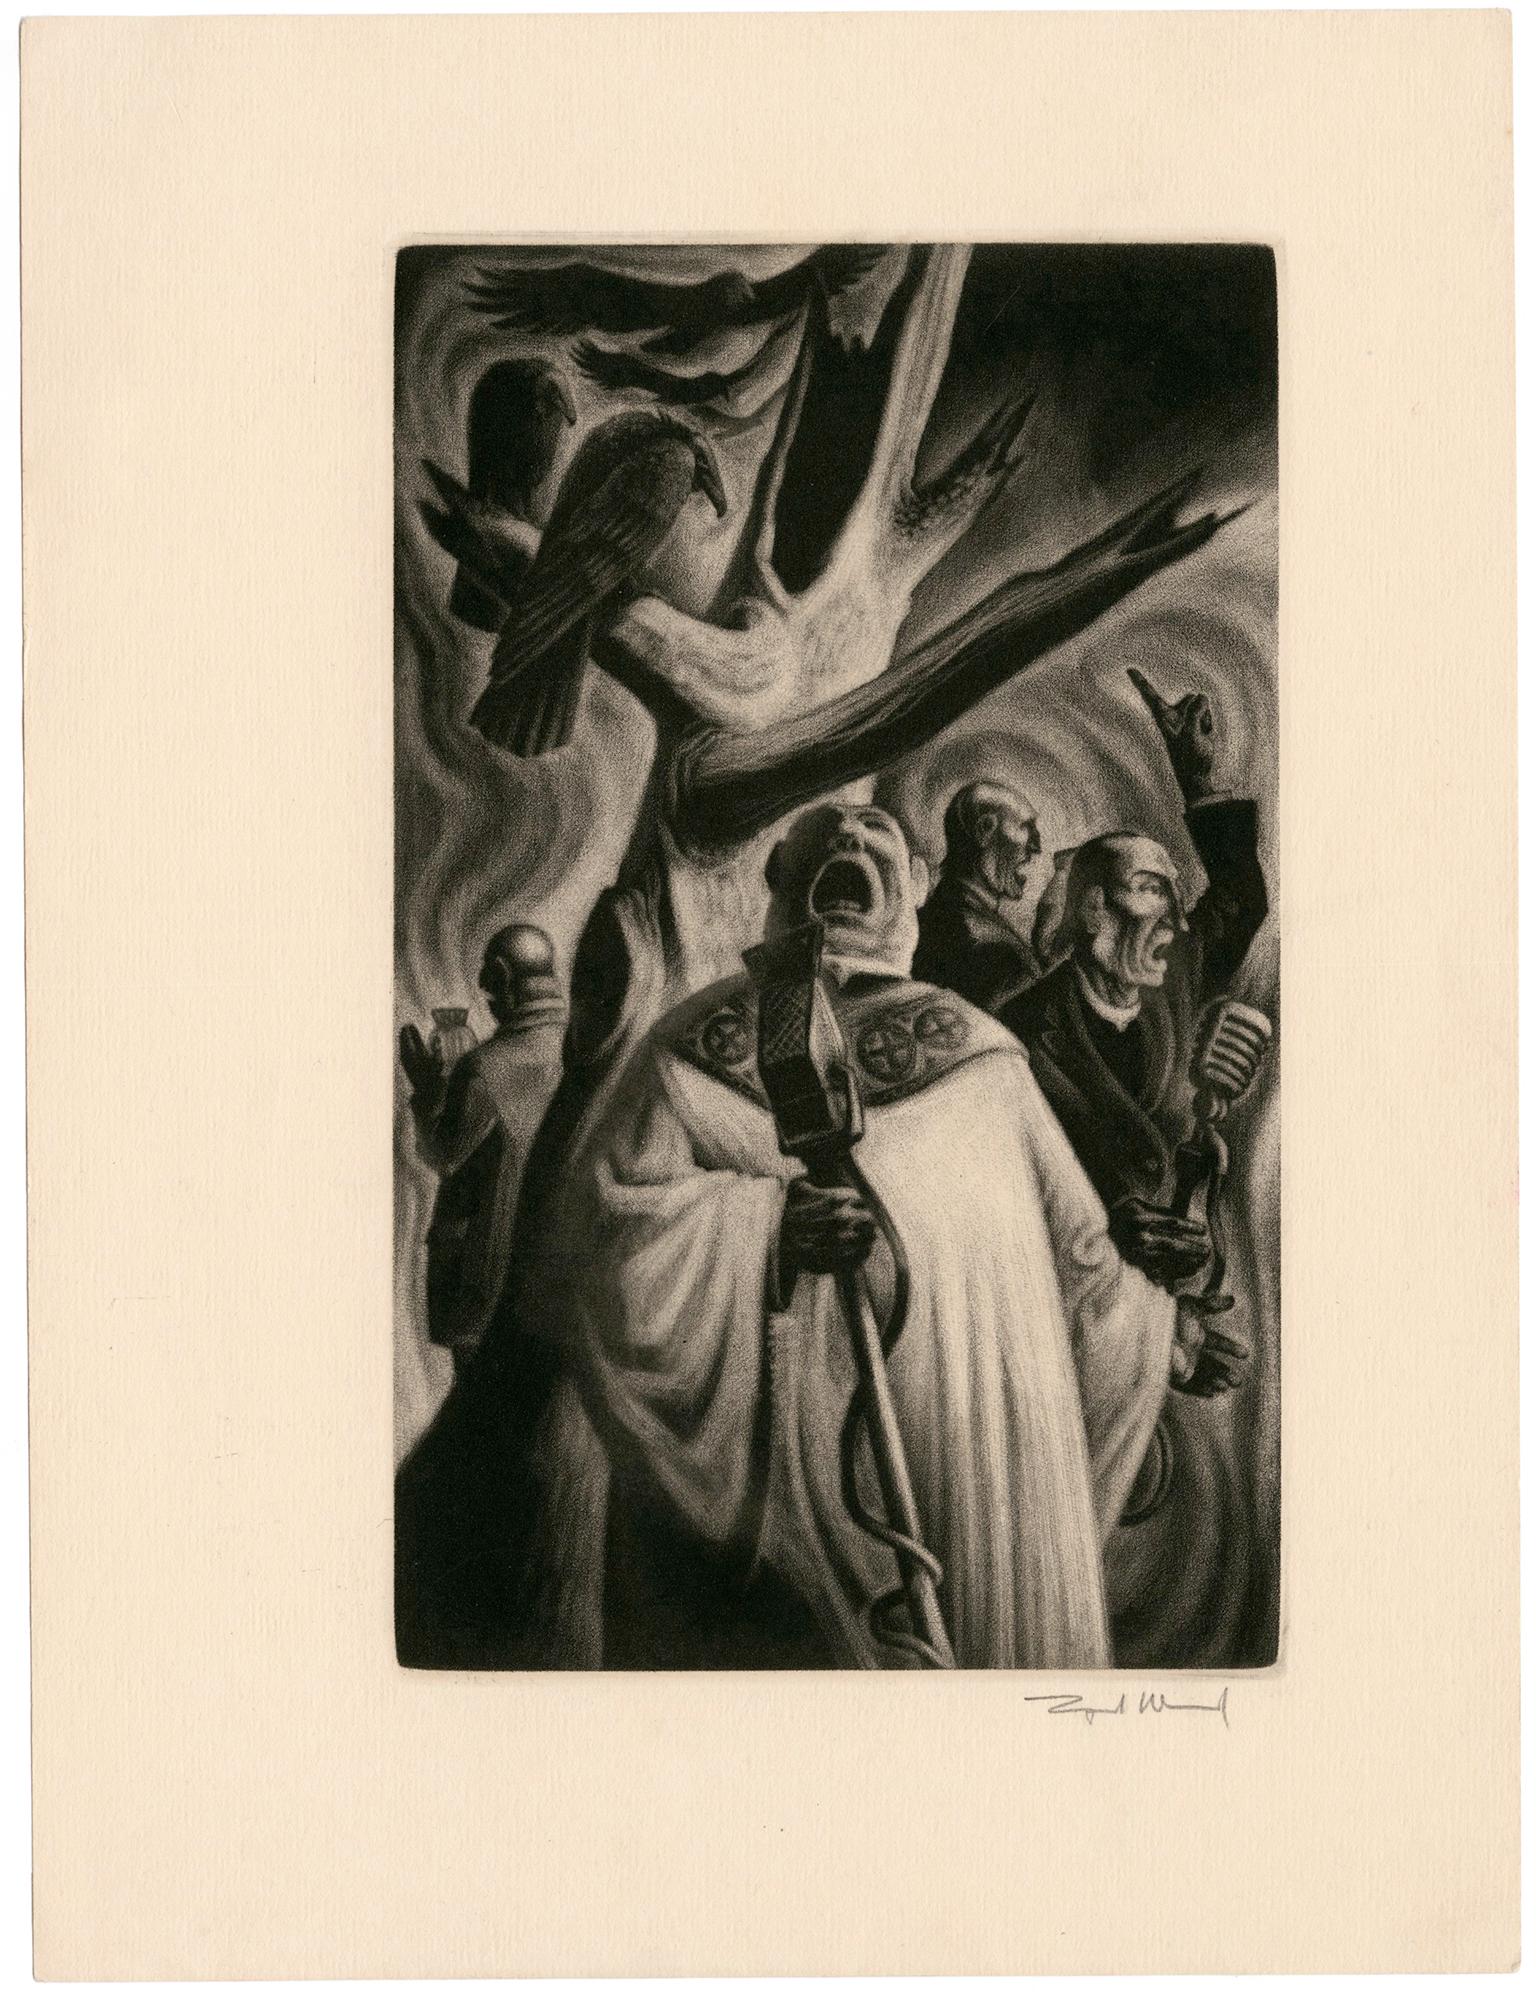 'Priests' from 'In Praise of Folly' — 1940s Graphic Modernism - Print by Lynd Ward